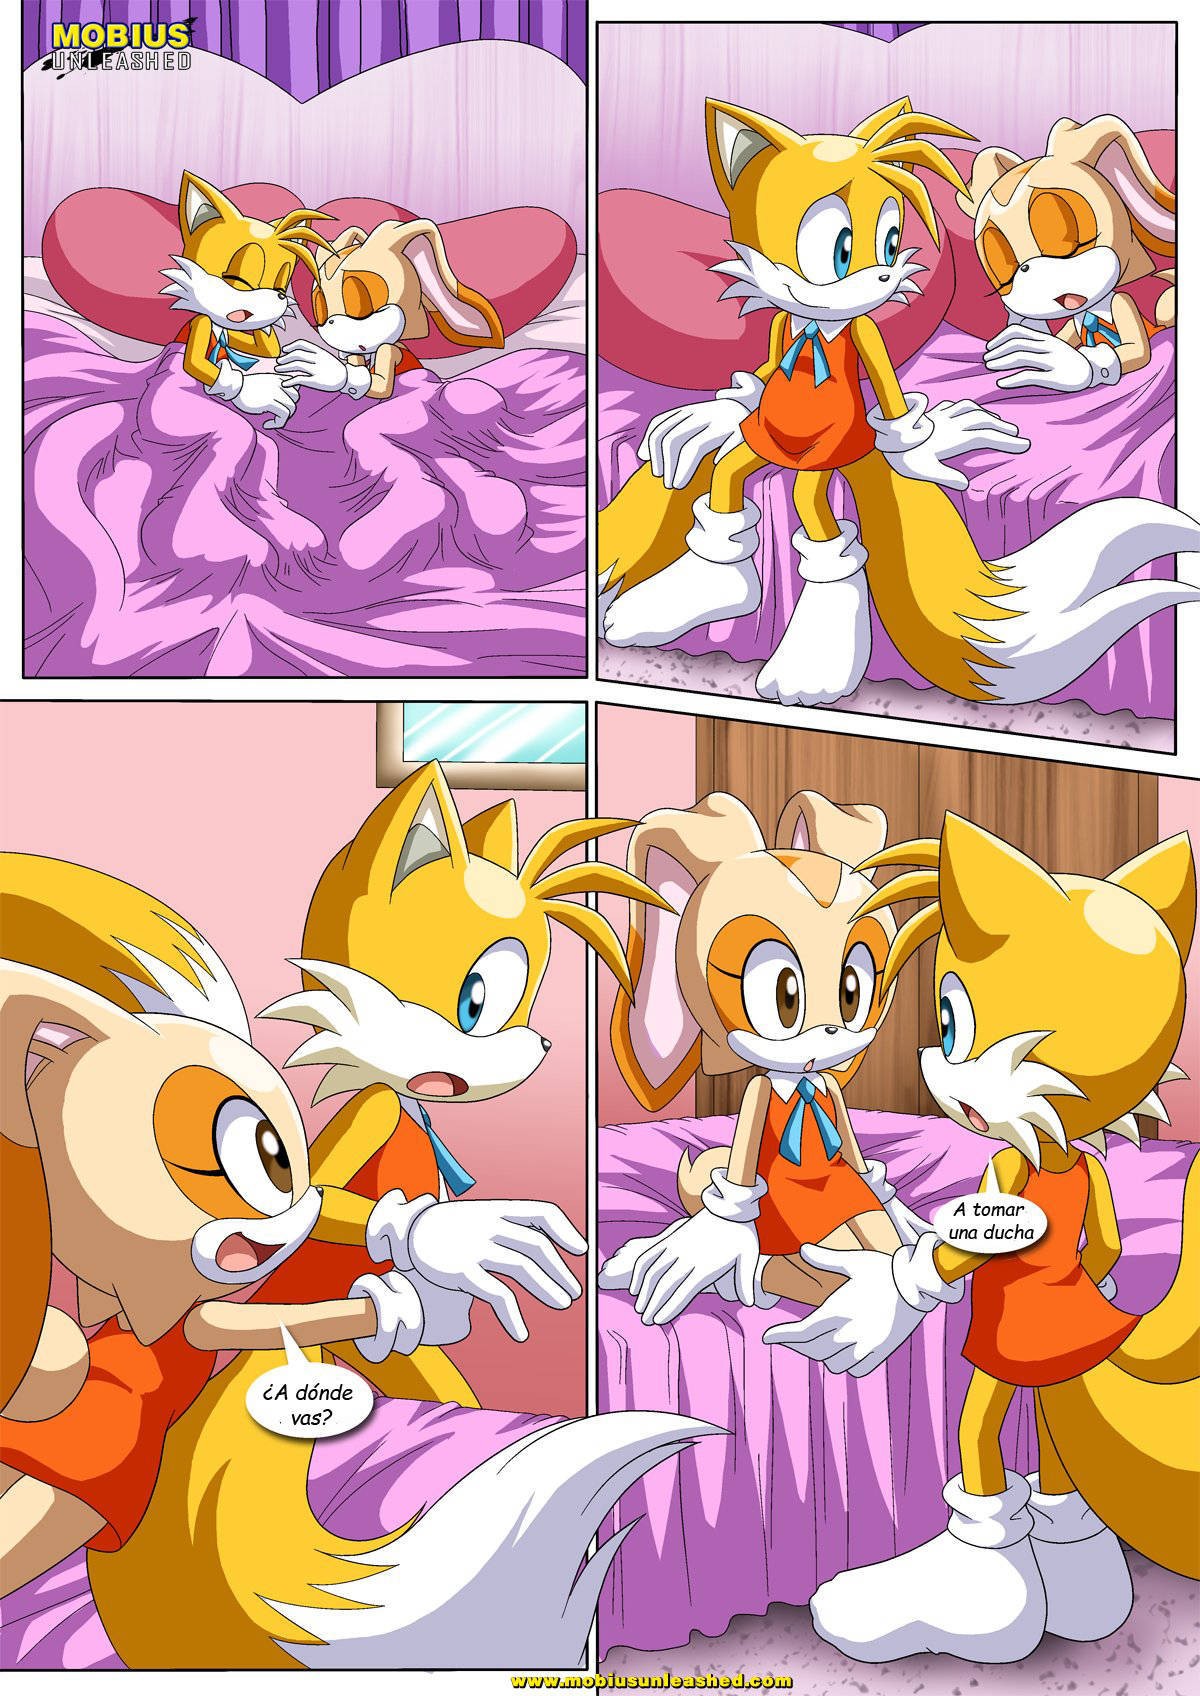 Tails and Cream - 1